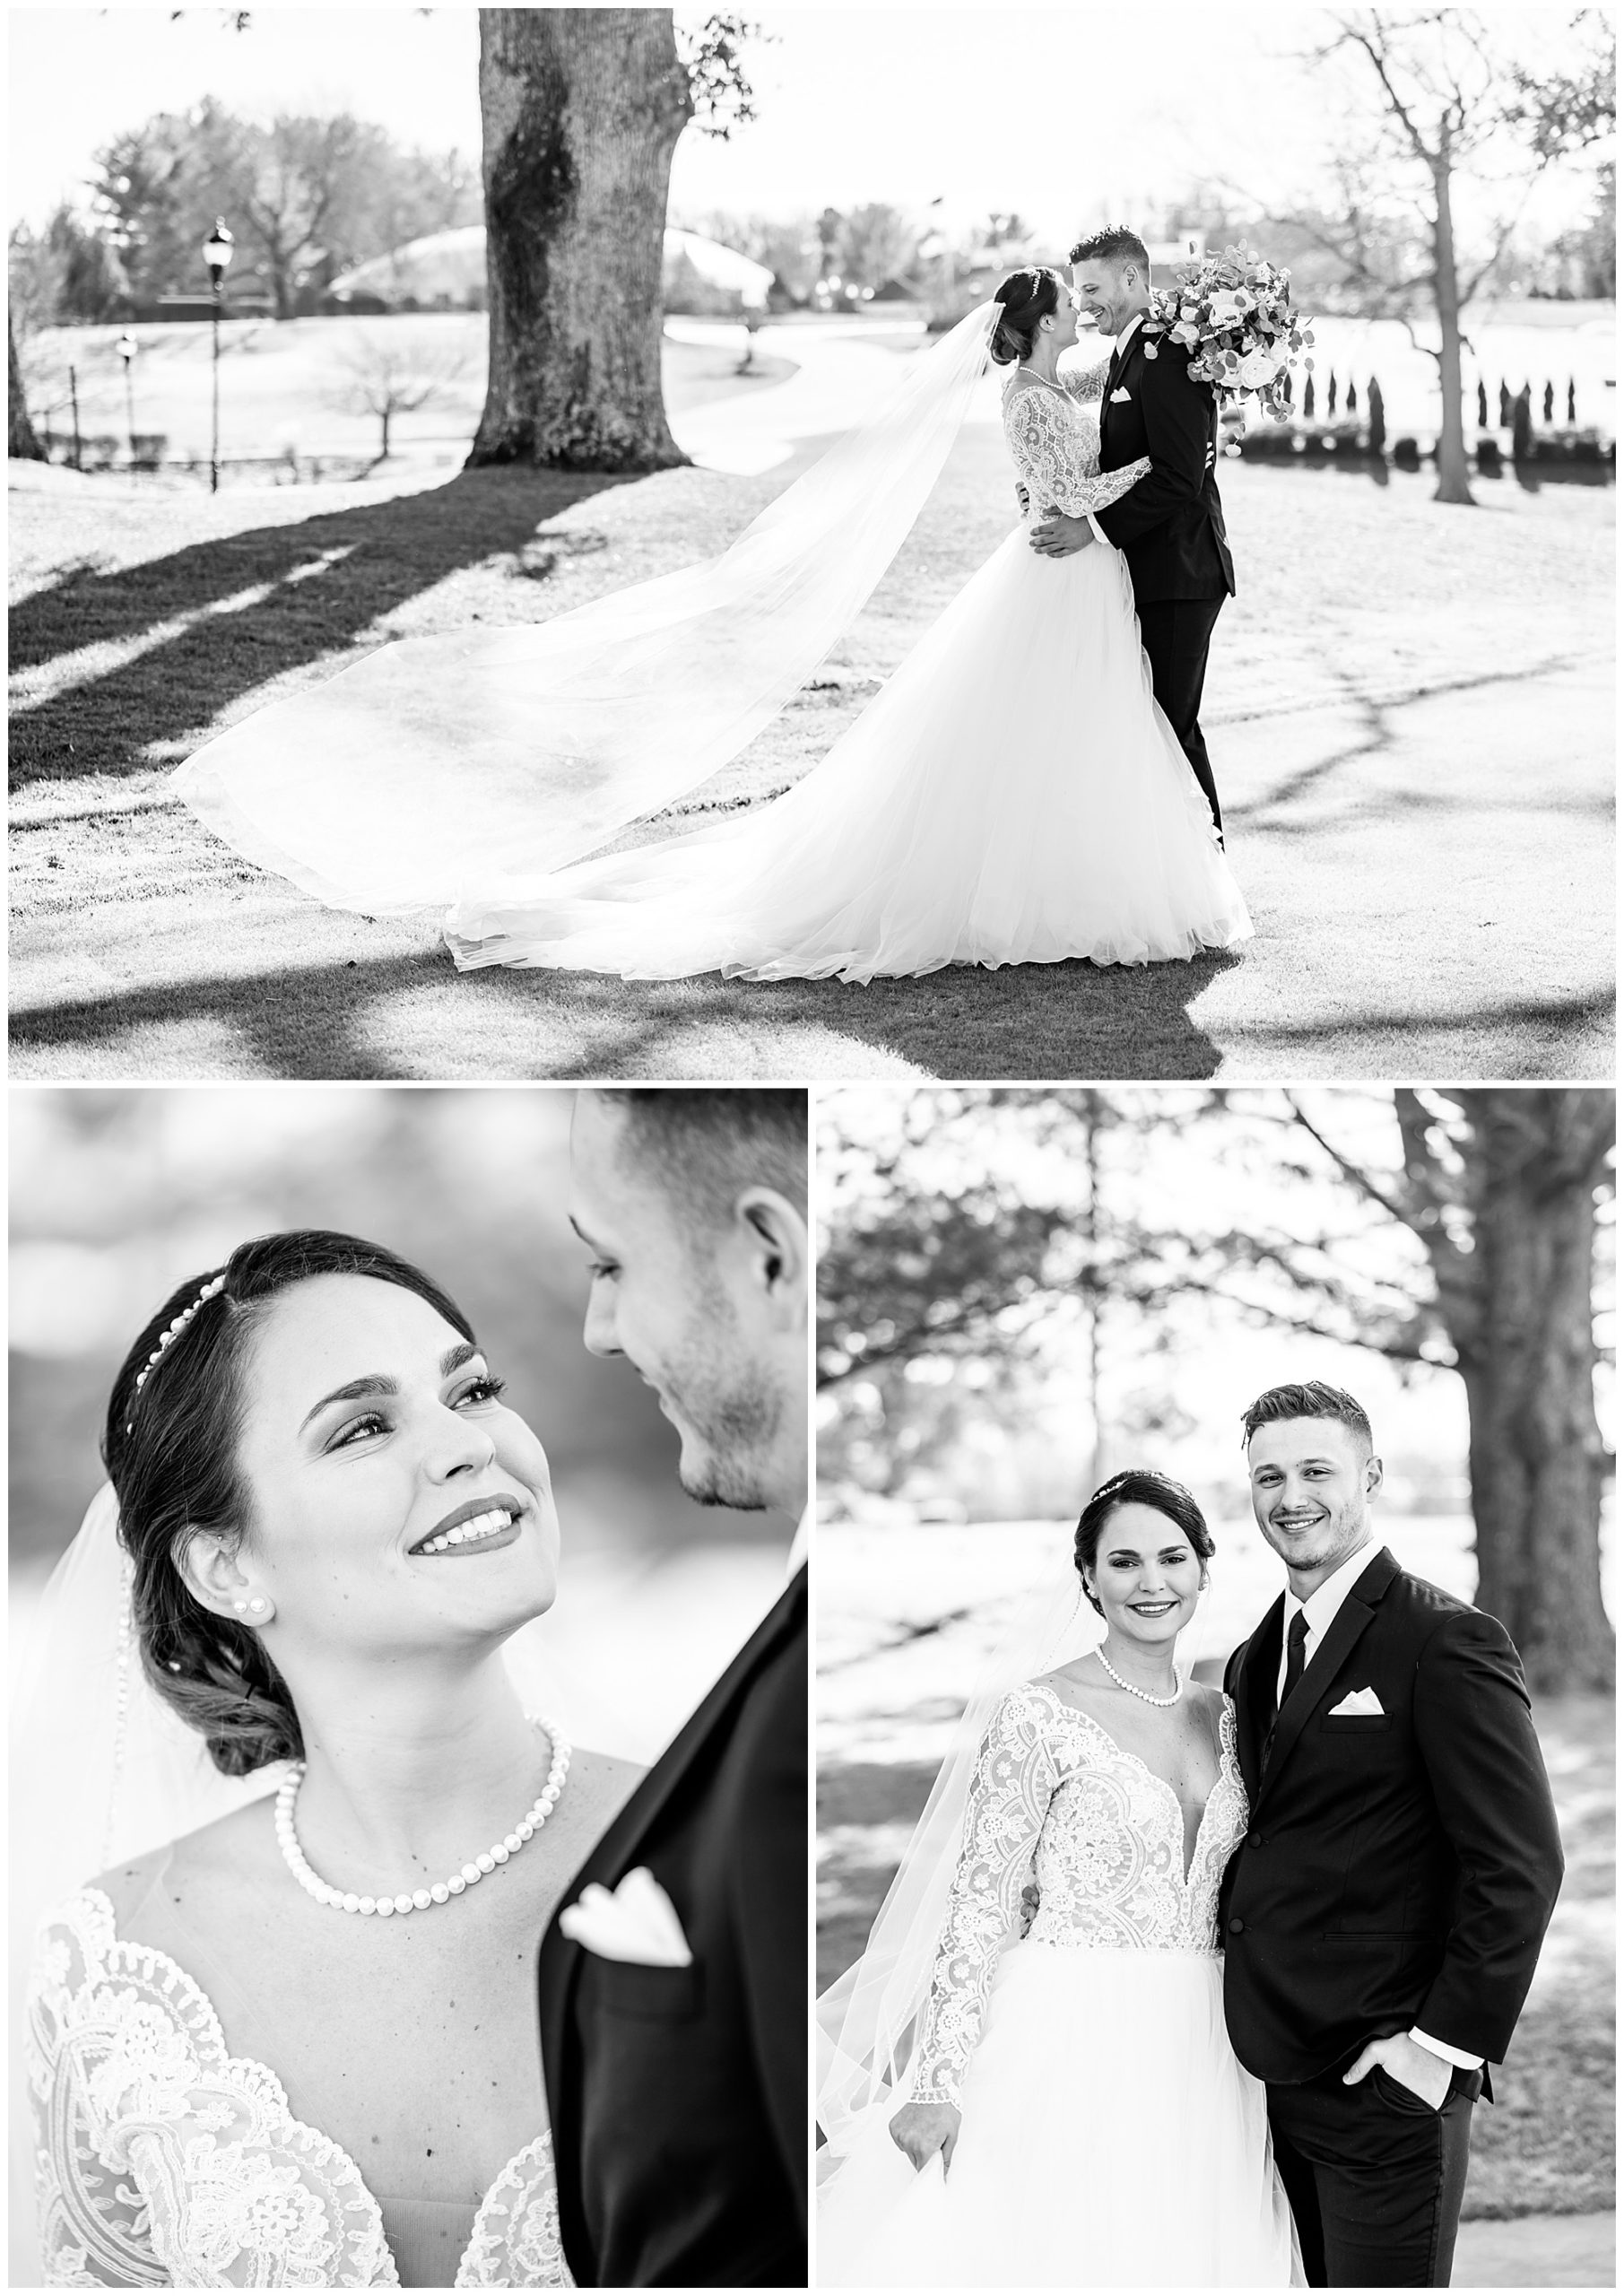 royal inspired Country Club of Fairfax wedding, Fairfax VA photographer, country club wedding, DC area country club, DC country club wedding, DC wedding photography, northern Virginia wedding photography,DC wedding photographer, golf course wedding, winter wedding, royals inspired wedding, Rachel E.H. Photography, black and white, bride smiling at groom, couple almost kissing